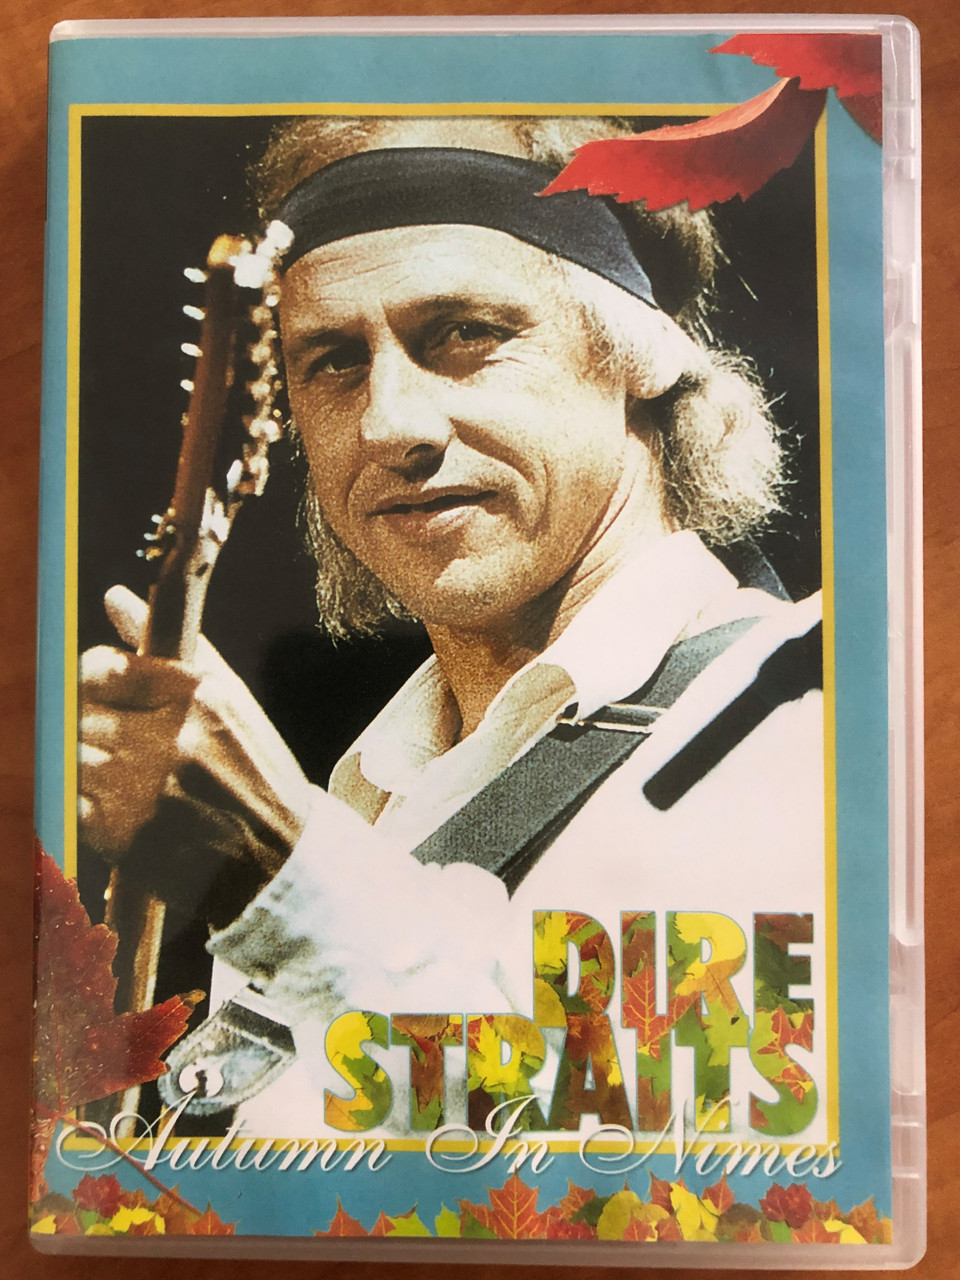 Dire Straits DVD 2005 Autumn In Nimes / Crime Crow Productions – CCPDVD016  / Walk Of Life , Heavy Fuel, Romeo And Juliet, The Bug, Private  Investigations, Sultans Of Swing - bibleinmylanguage